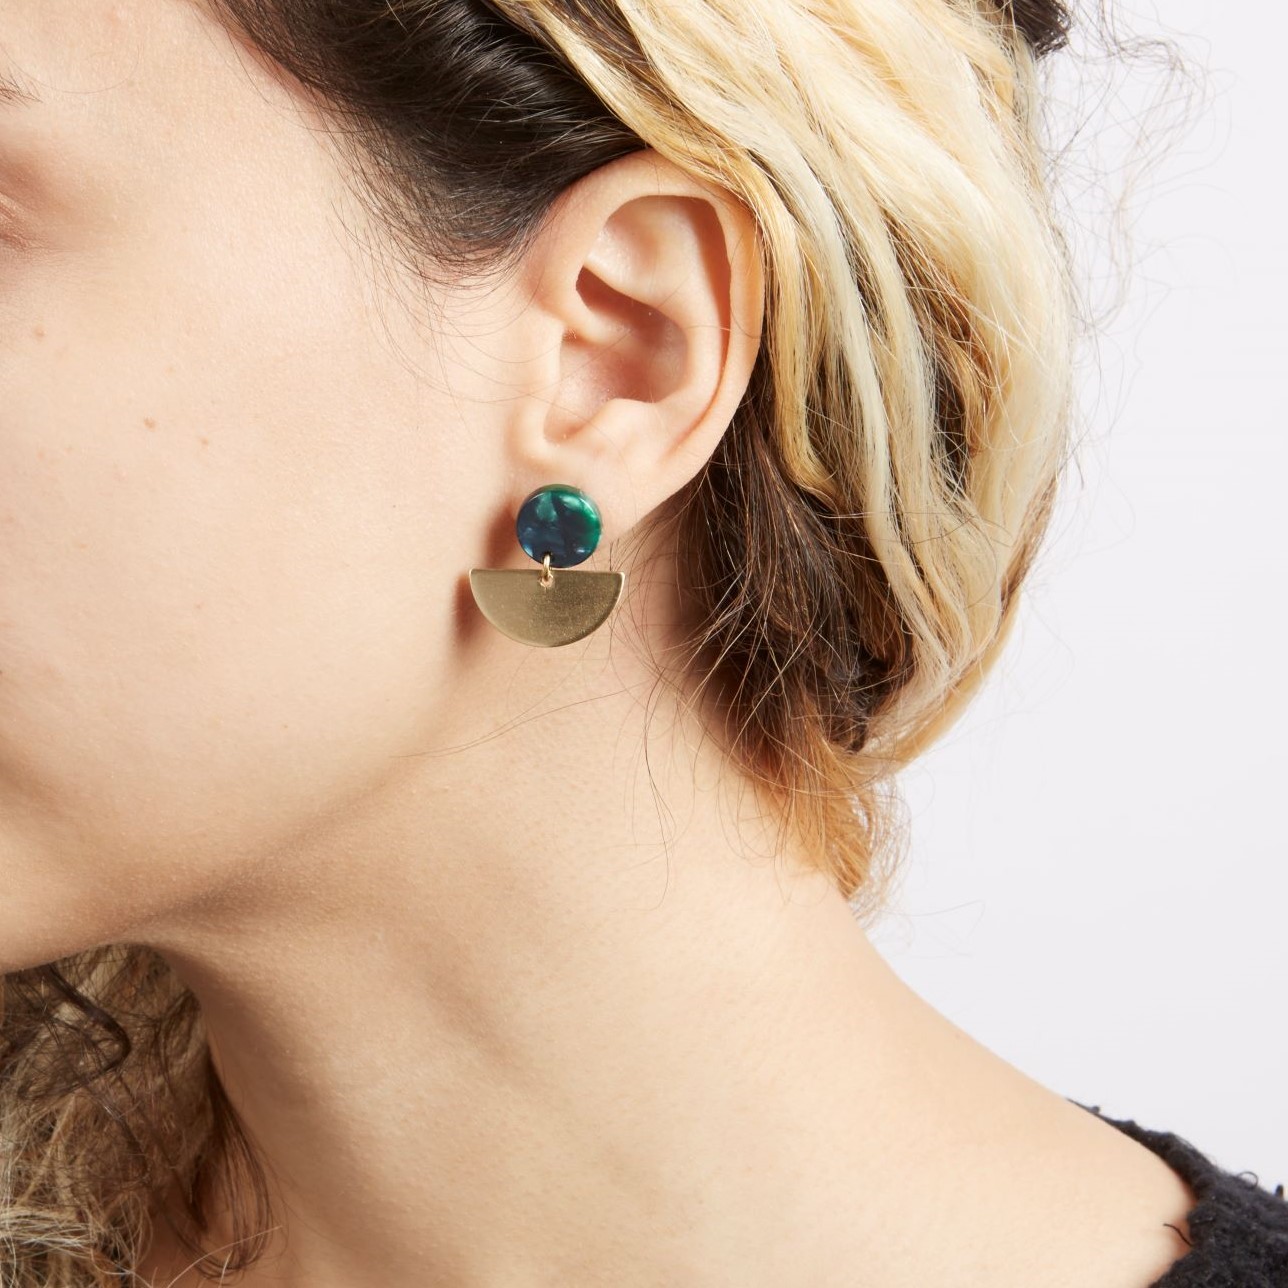 The best Valentine's Day gifts - green stud earrings